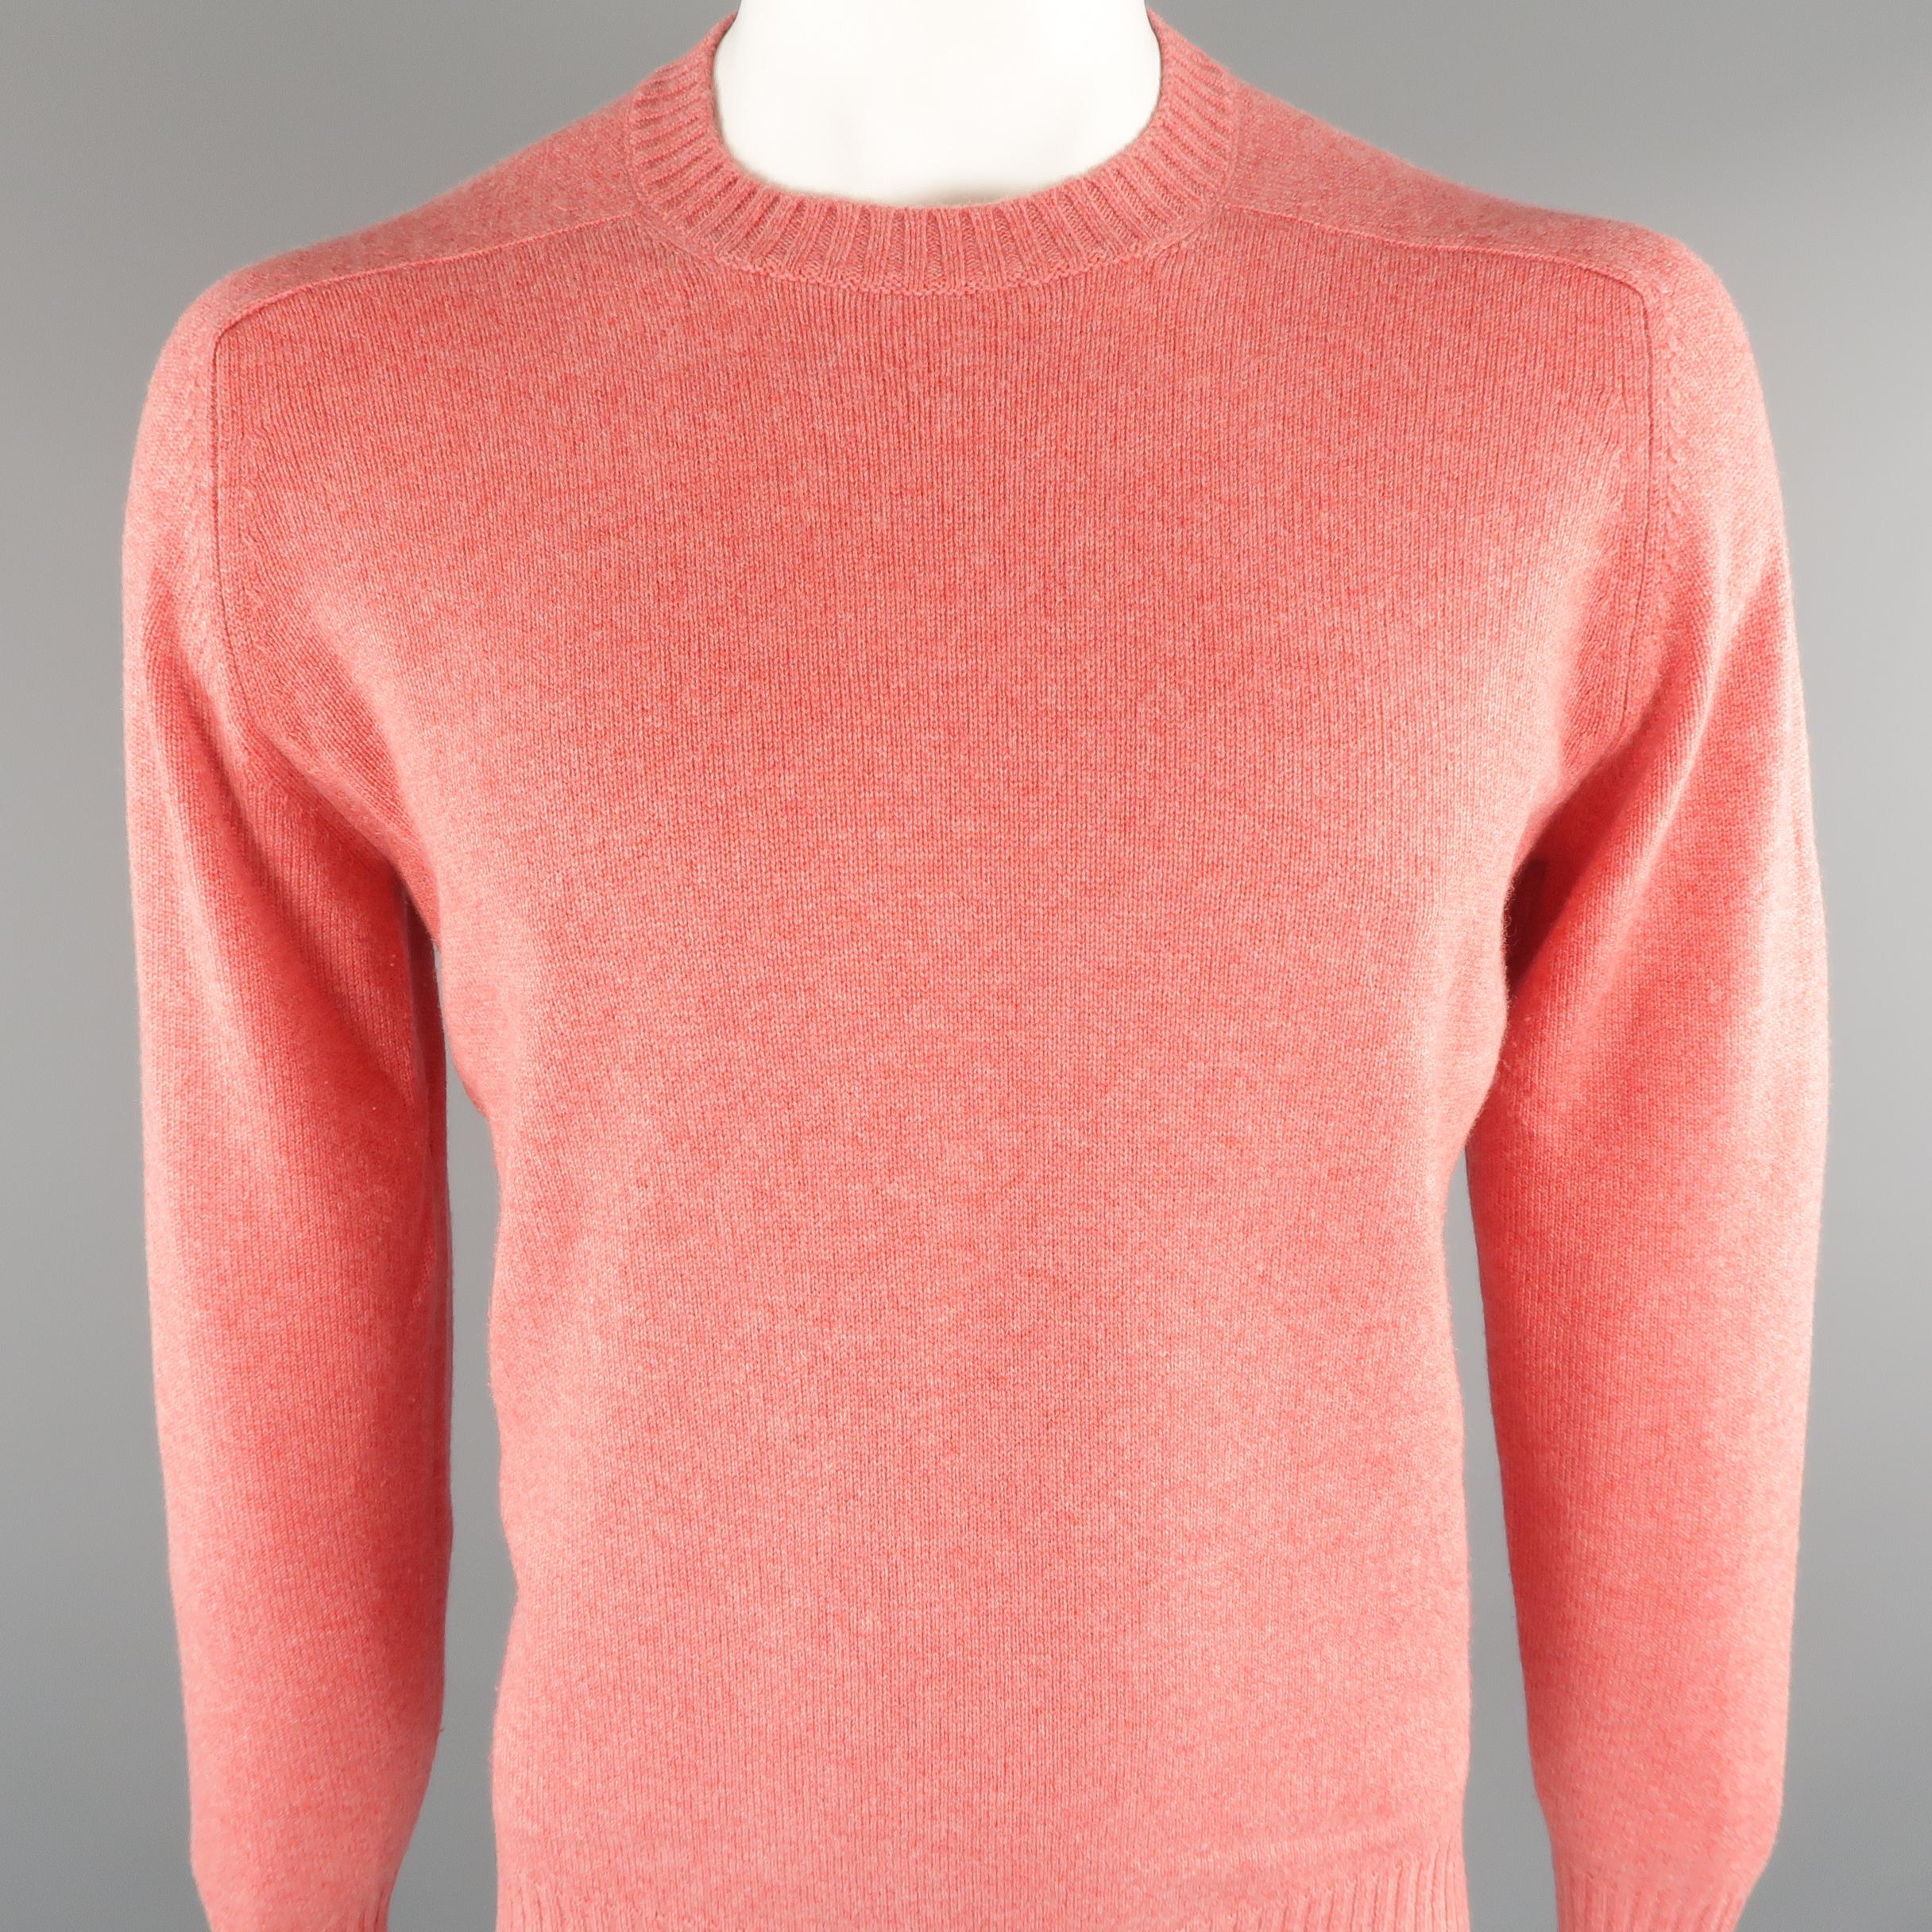 BRUNELLO CUCINELLI sweater comes in 100% cashmere, salmon tone, knited, with a crewneck and ribbed cuff and waistband. Made in Italy.
 
Excellent Pre-Owned Condition.
Marked: 52 IT
 
Measurements:
 
Shoulder: 18 in.
Chest: 46 in.
Sleeve: 27